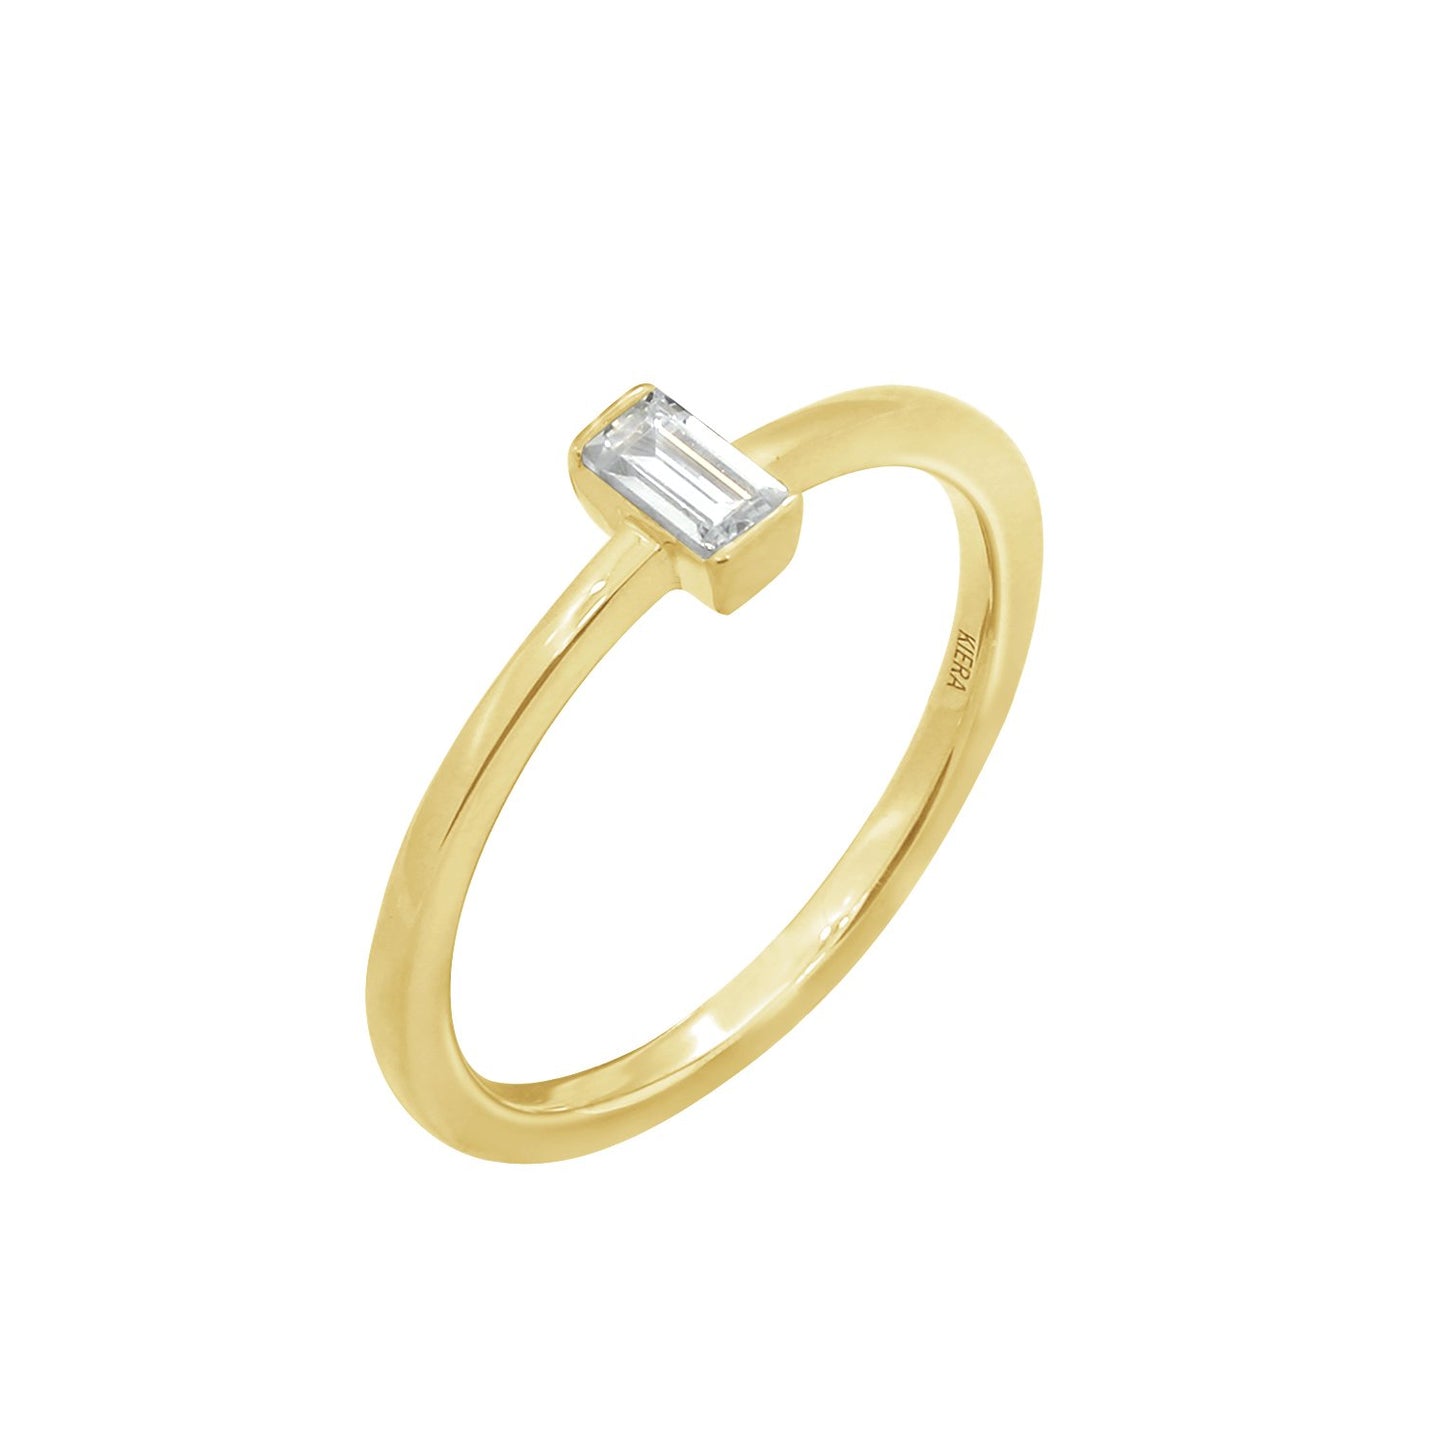 KIERA COUTURE RING BAR White Baguette Cut Yellow Gold Plated Sterling Silver Solitaire Daity Ring